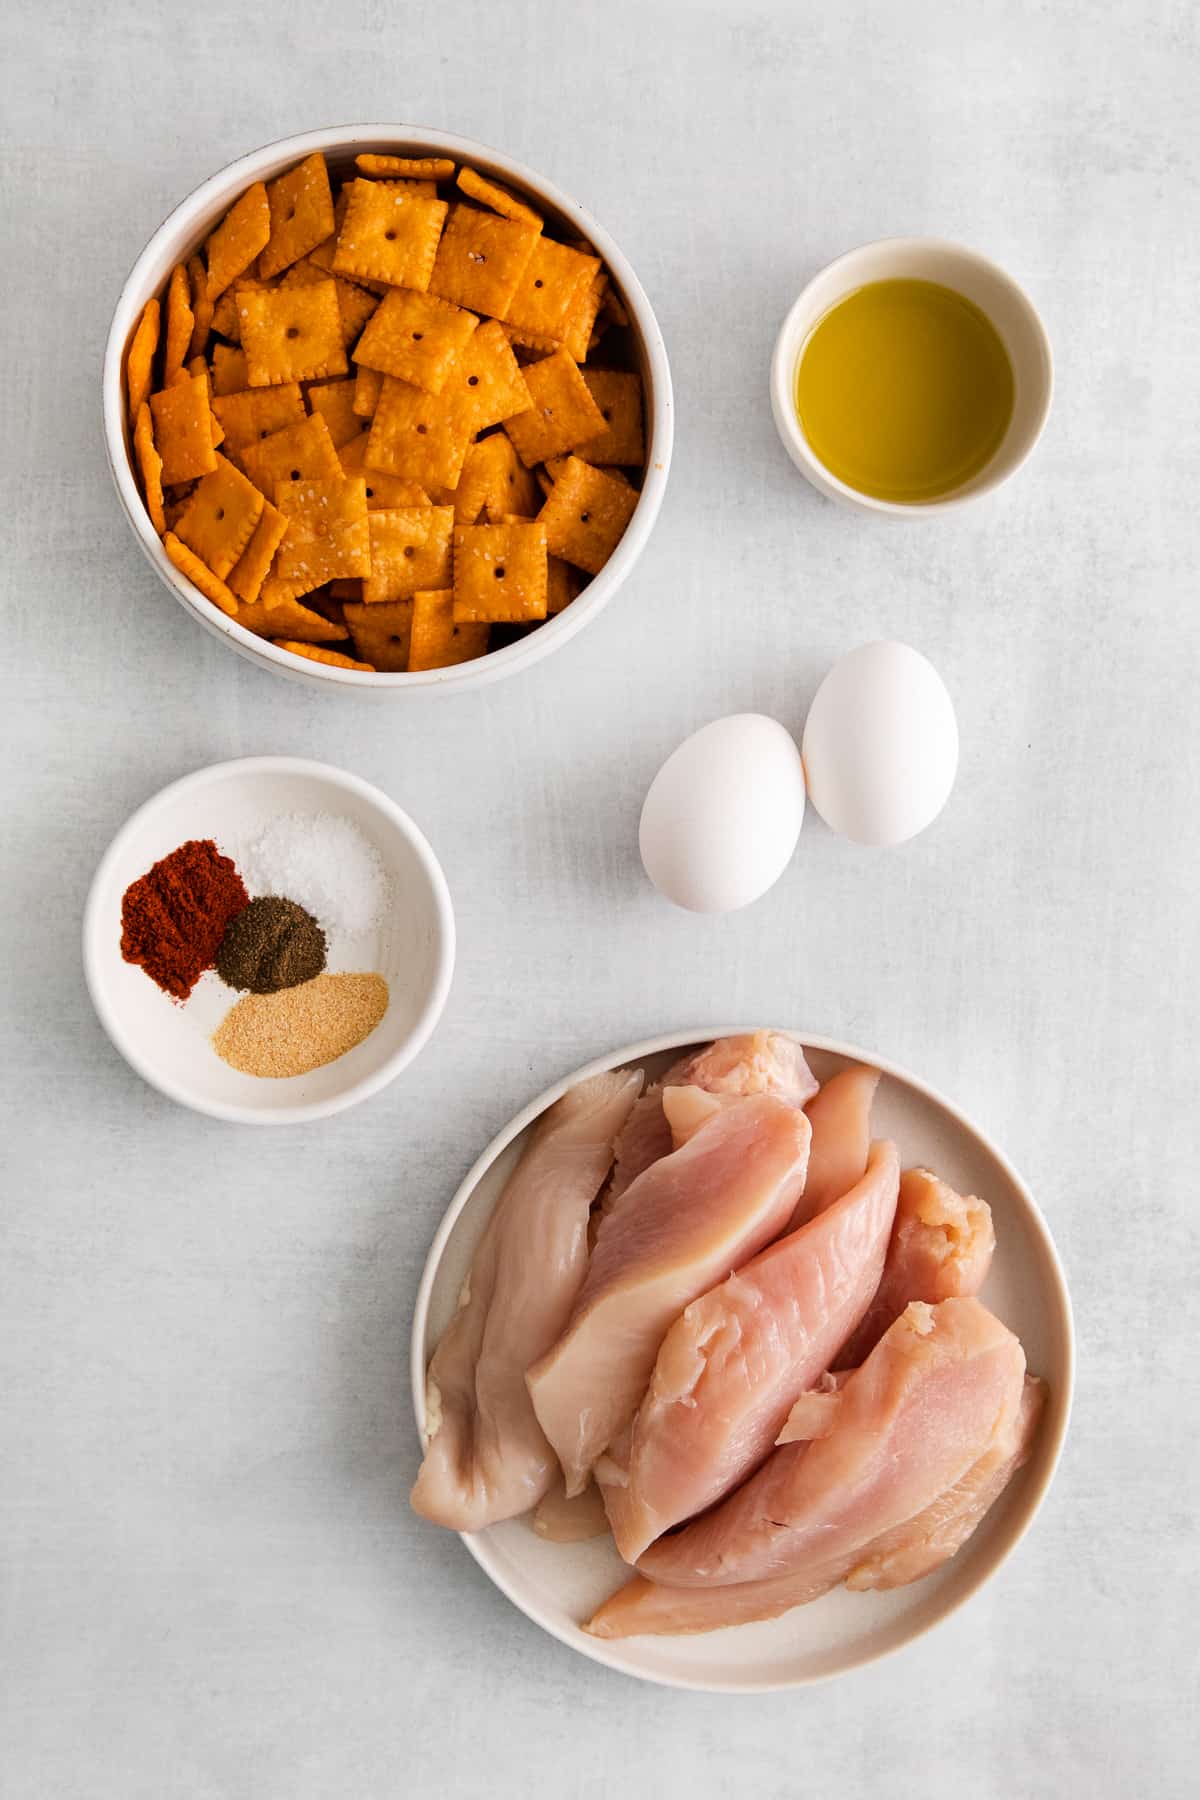 Ingredients for cheez-it breaded chicken fingers in bowls.